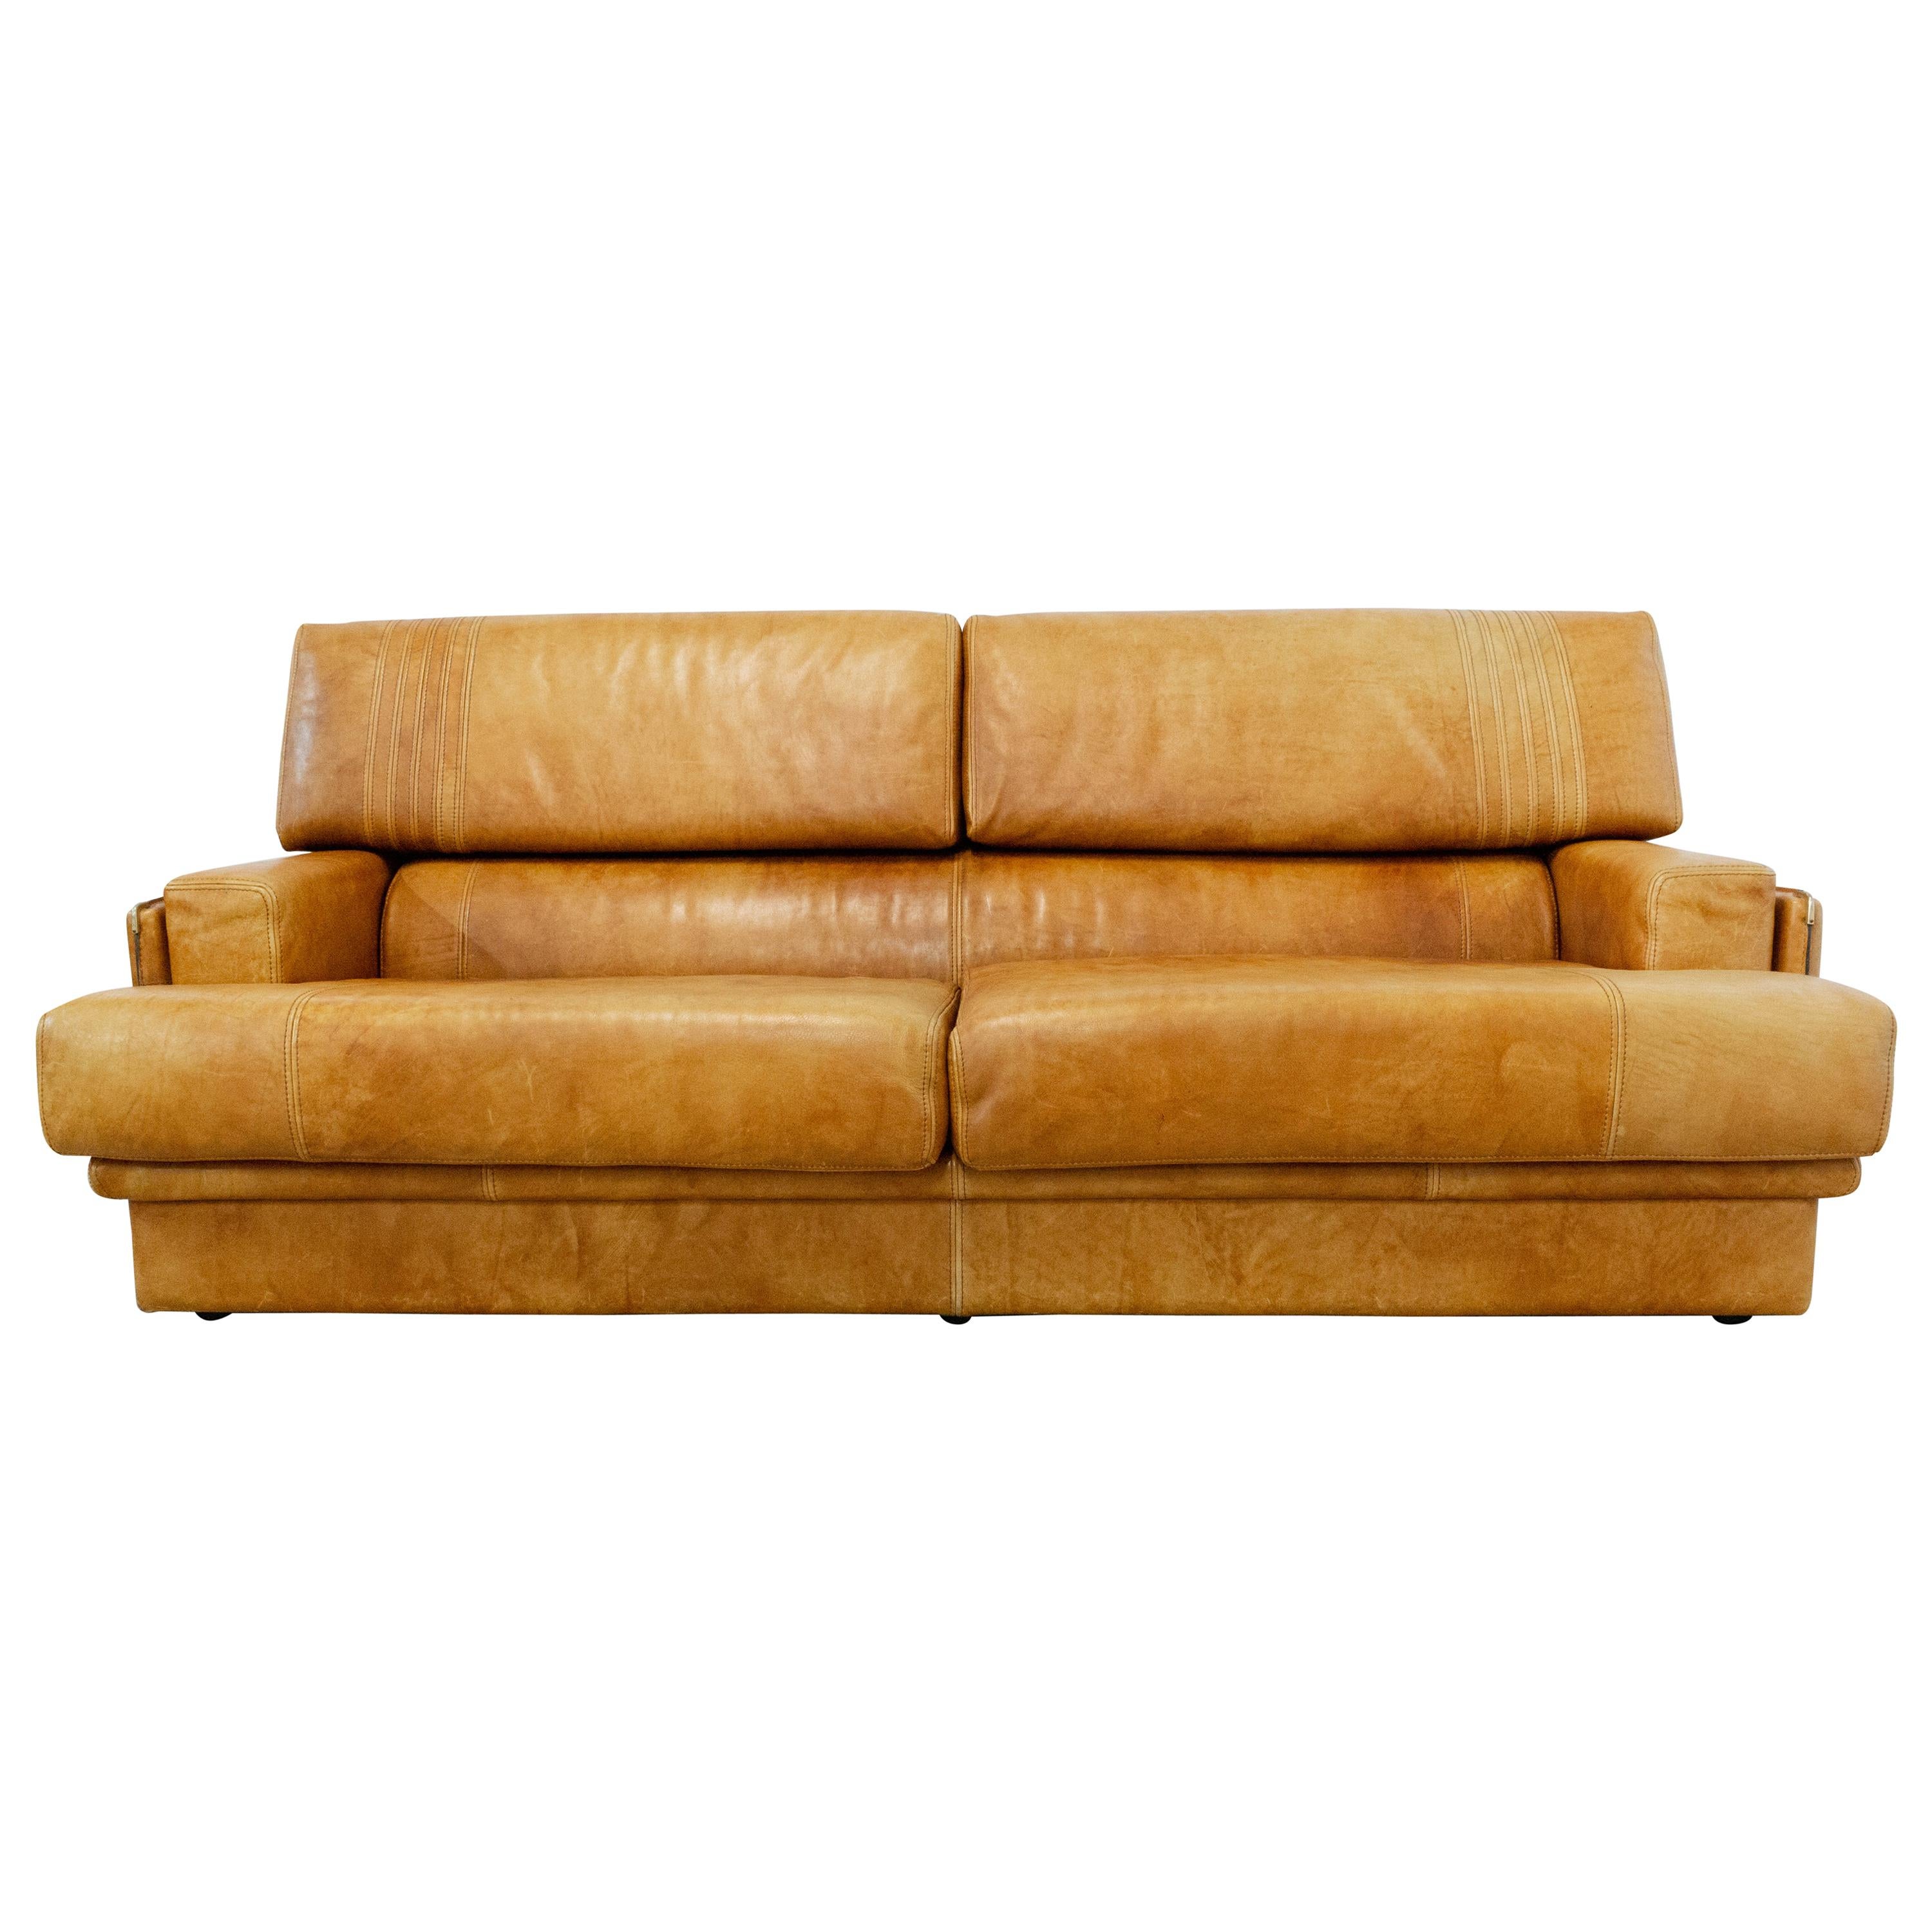 Sofa Cognac Leather, MarCo Milisich for Baxter Arcon, 1970 at 1stDibs